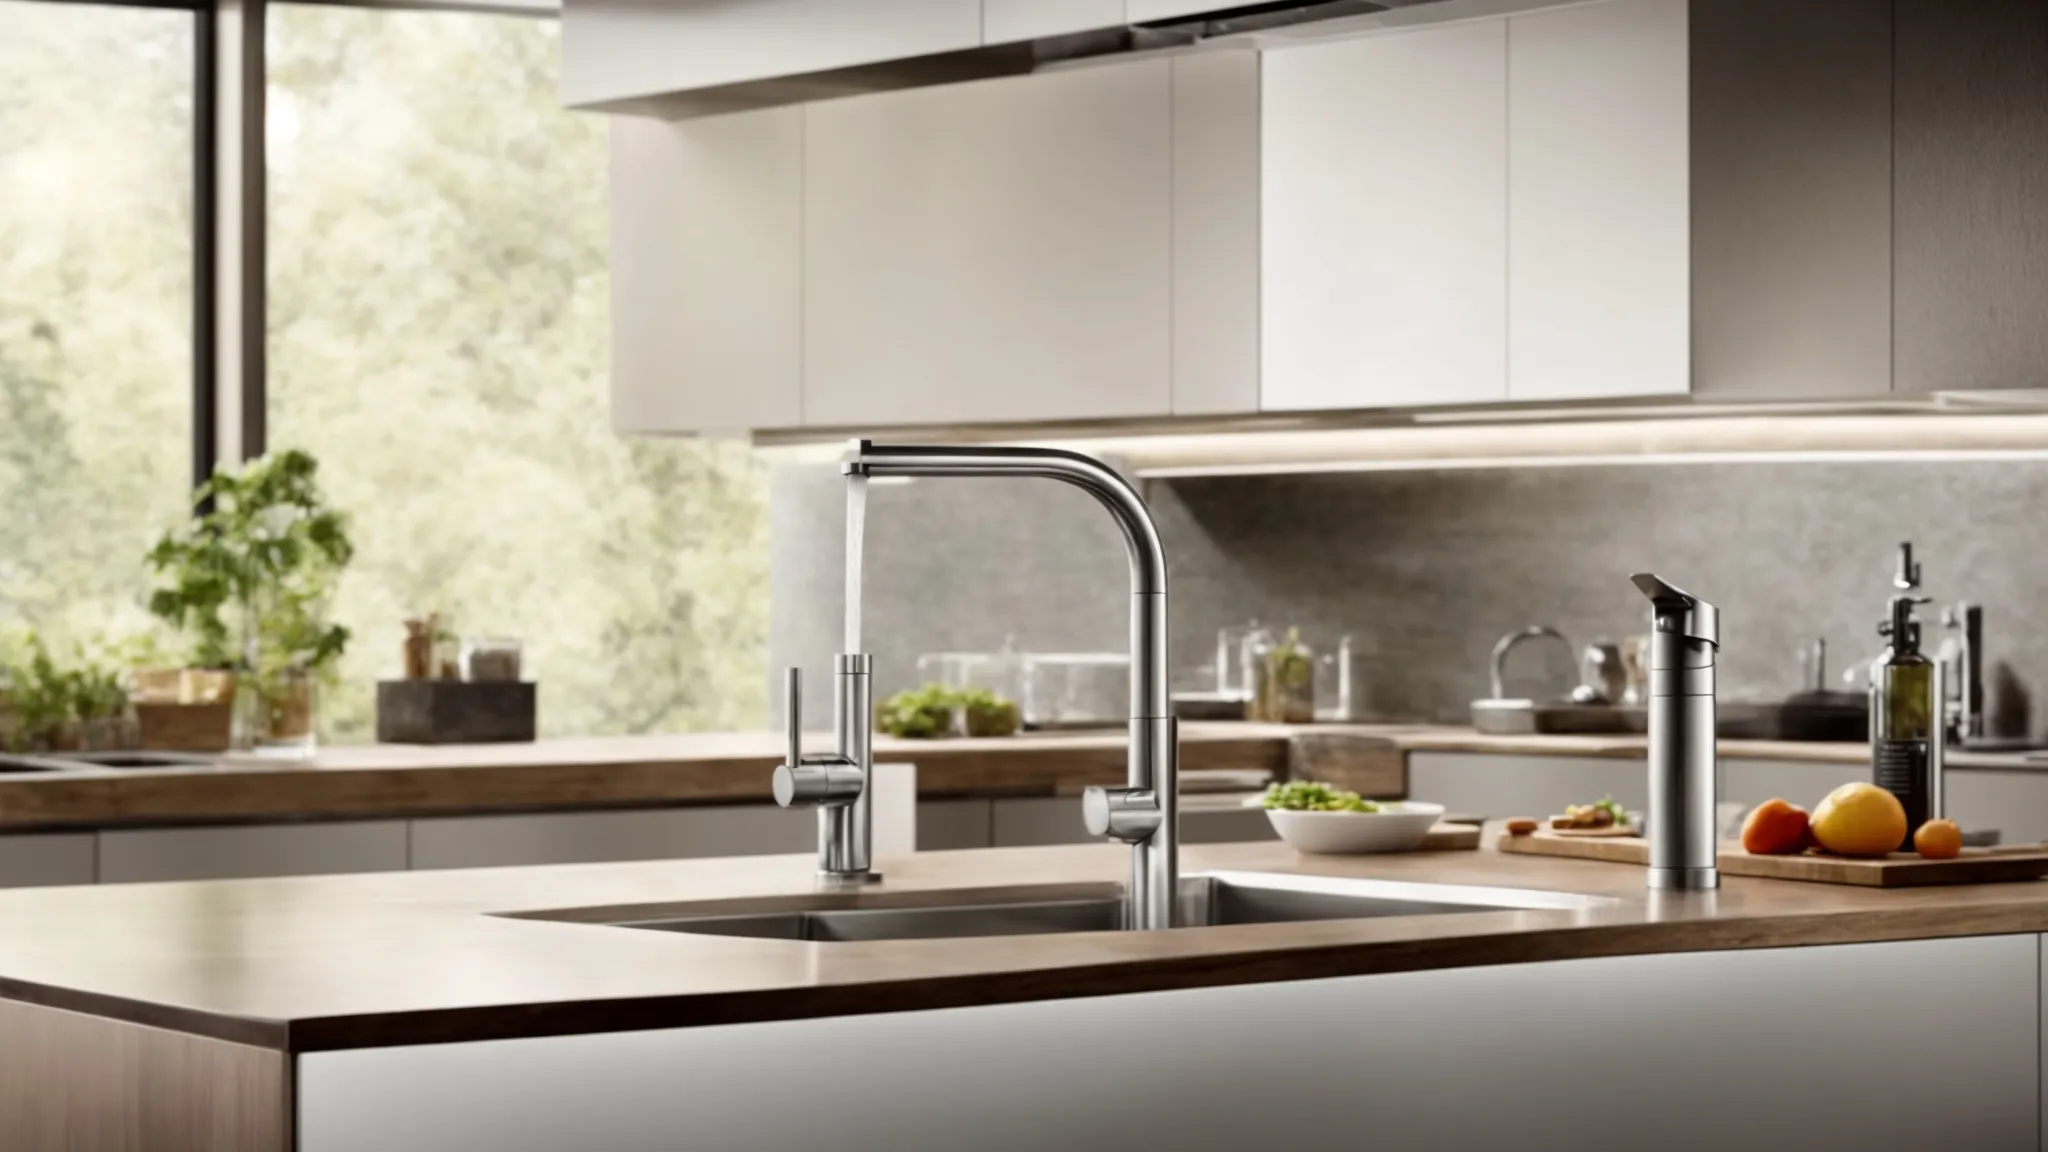 in a modern kitchen, an individual waves their hand over a sensor to activate a faucet, illustrating the seamless integration of touchless technology.